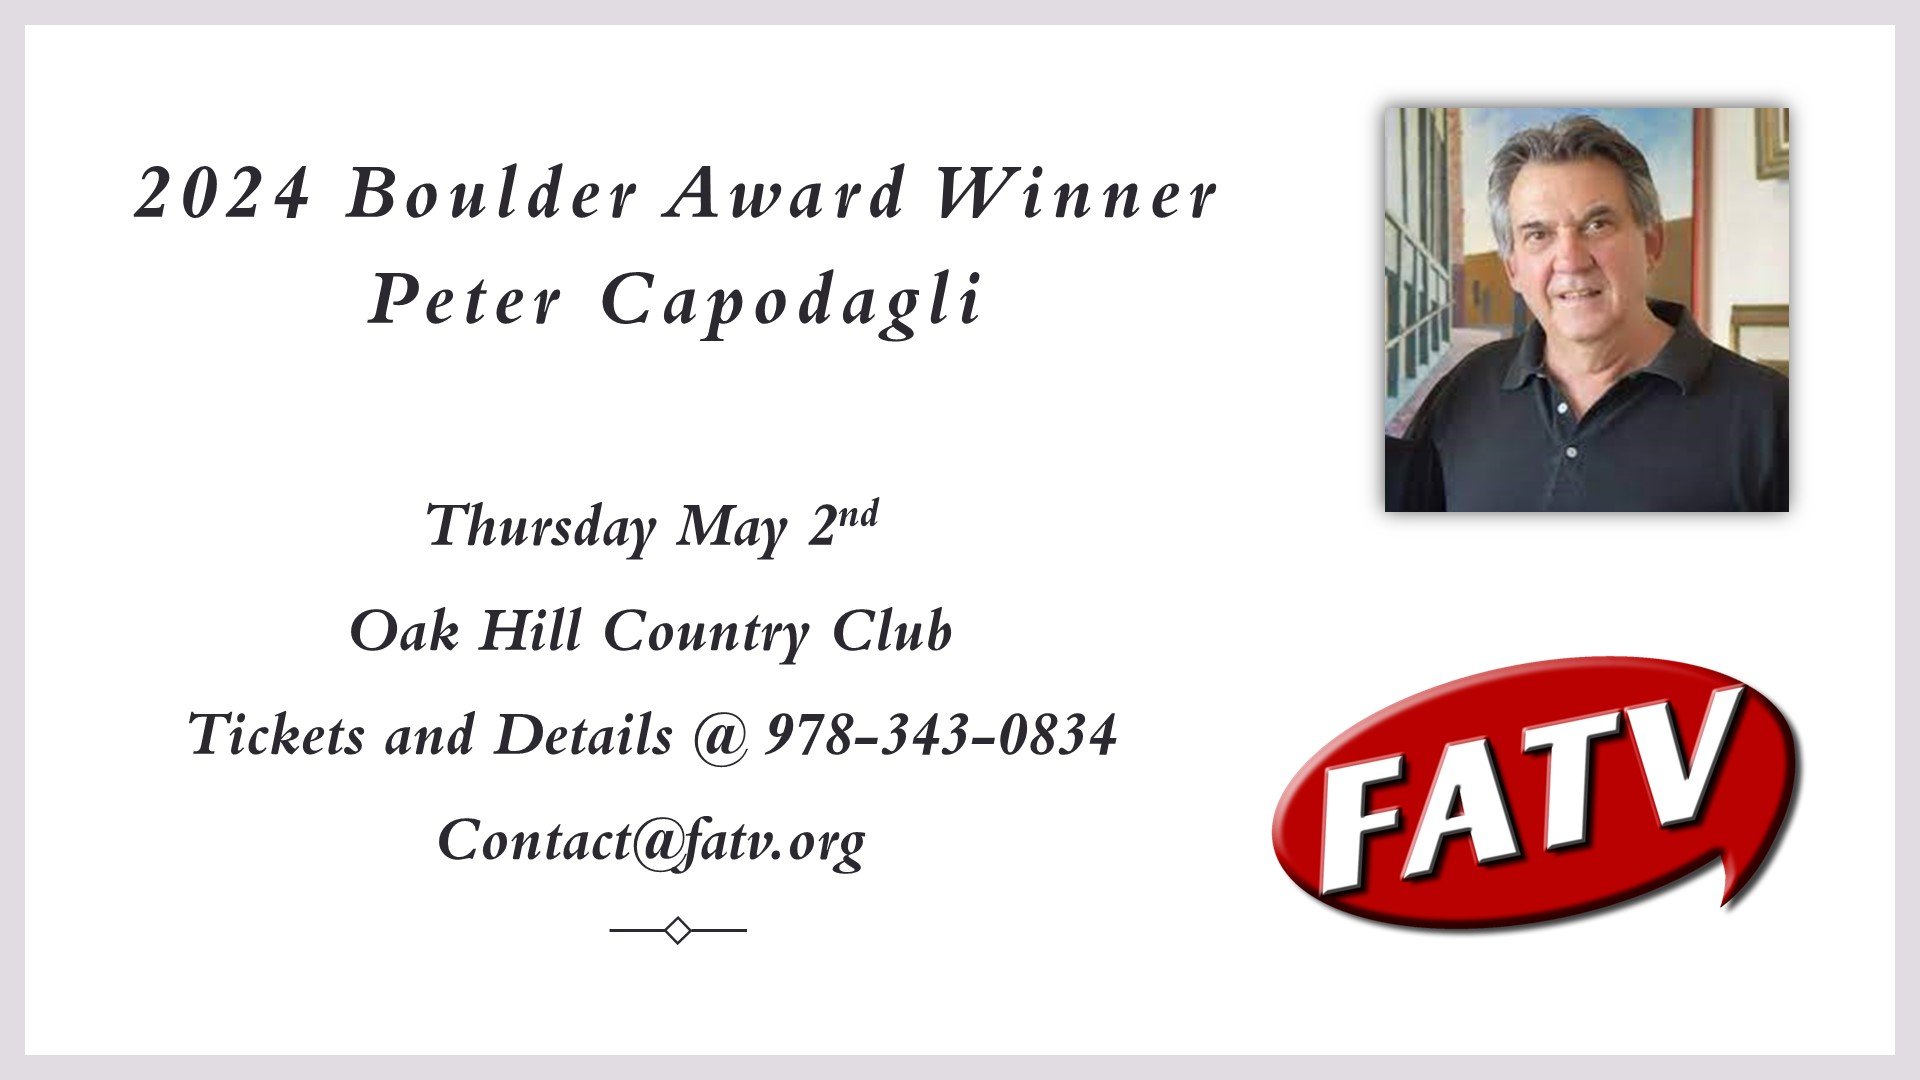 Join FATV on Thursday, May 2, 2024 at Oak Hill Country Club to celebrate the 2024 Boulder Award Winner Peter Capodagli 
Tickets are available now through Friday, April 26, 2024. 
Call FATV at 978-343-0834 for reservations or
In Person at the FATV Stu